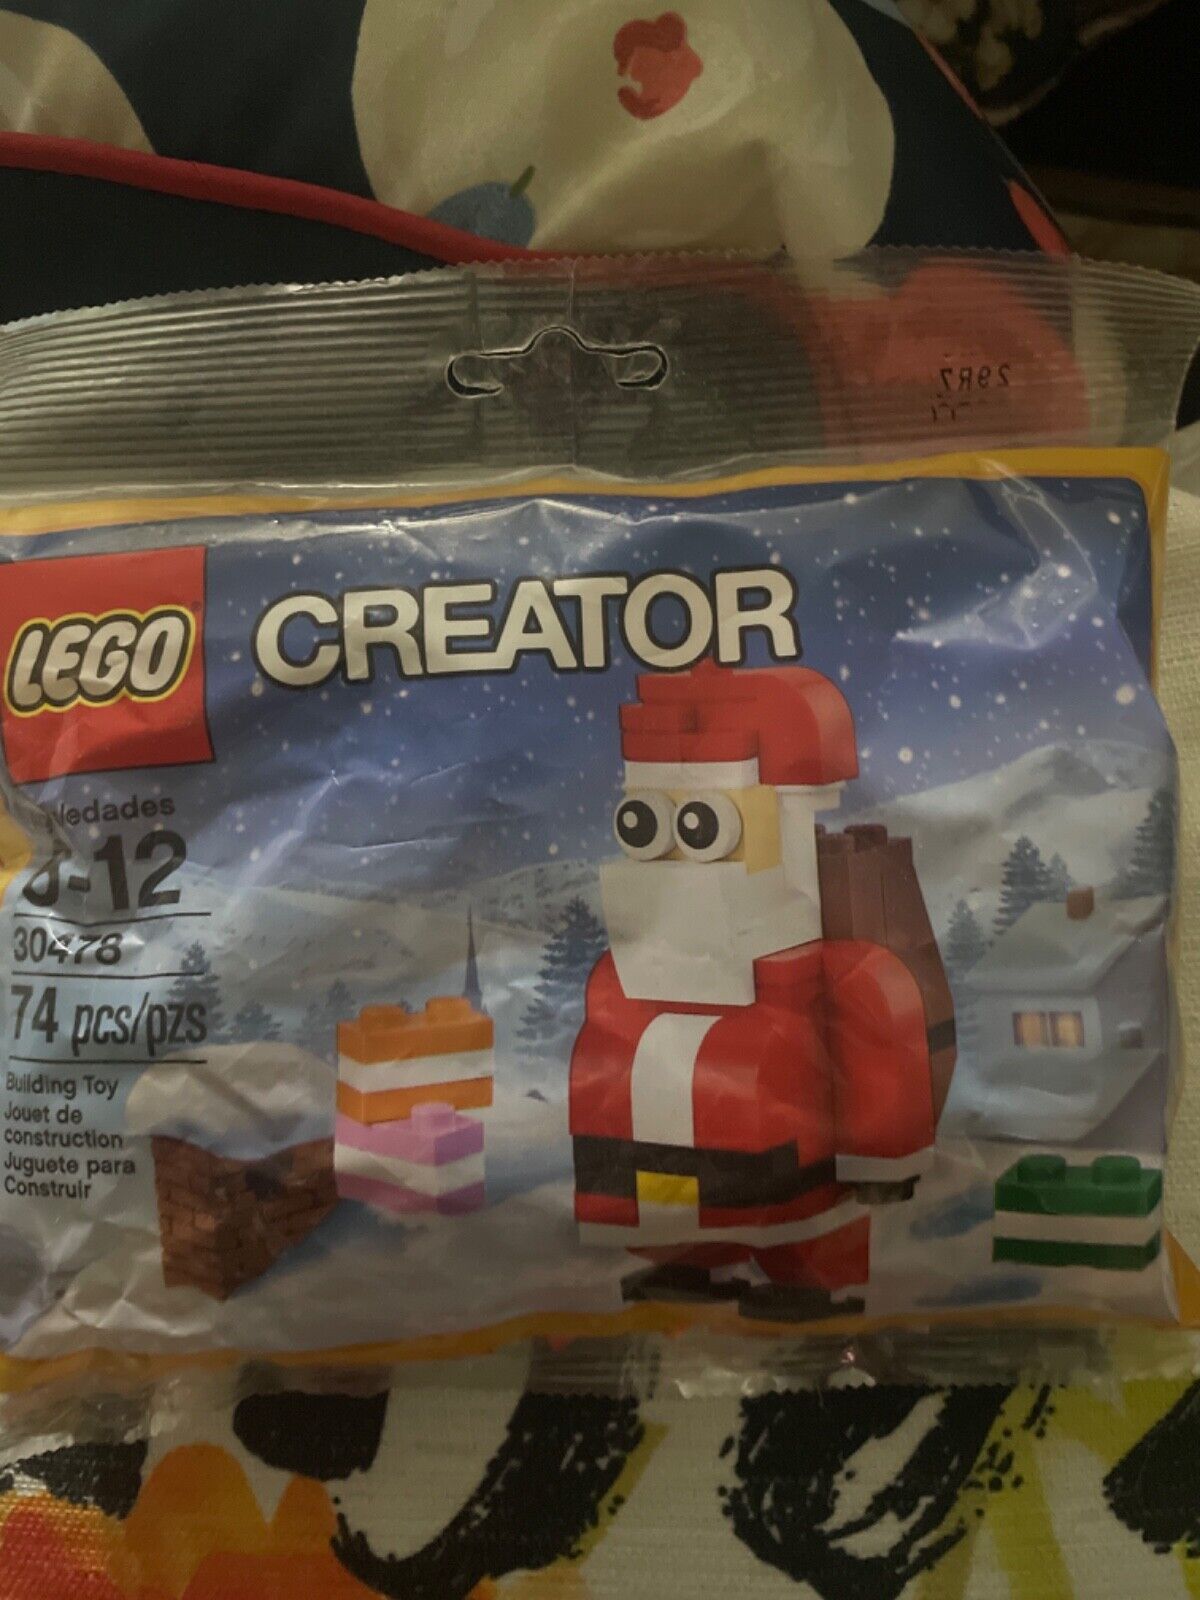 LEGO Creator Santa Claus (30478) Polybag Holiday Brand New Factory Sealed